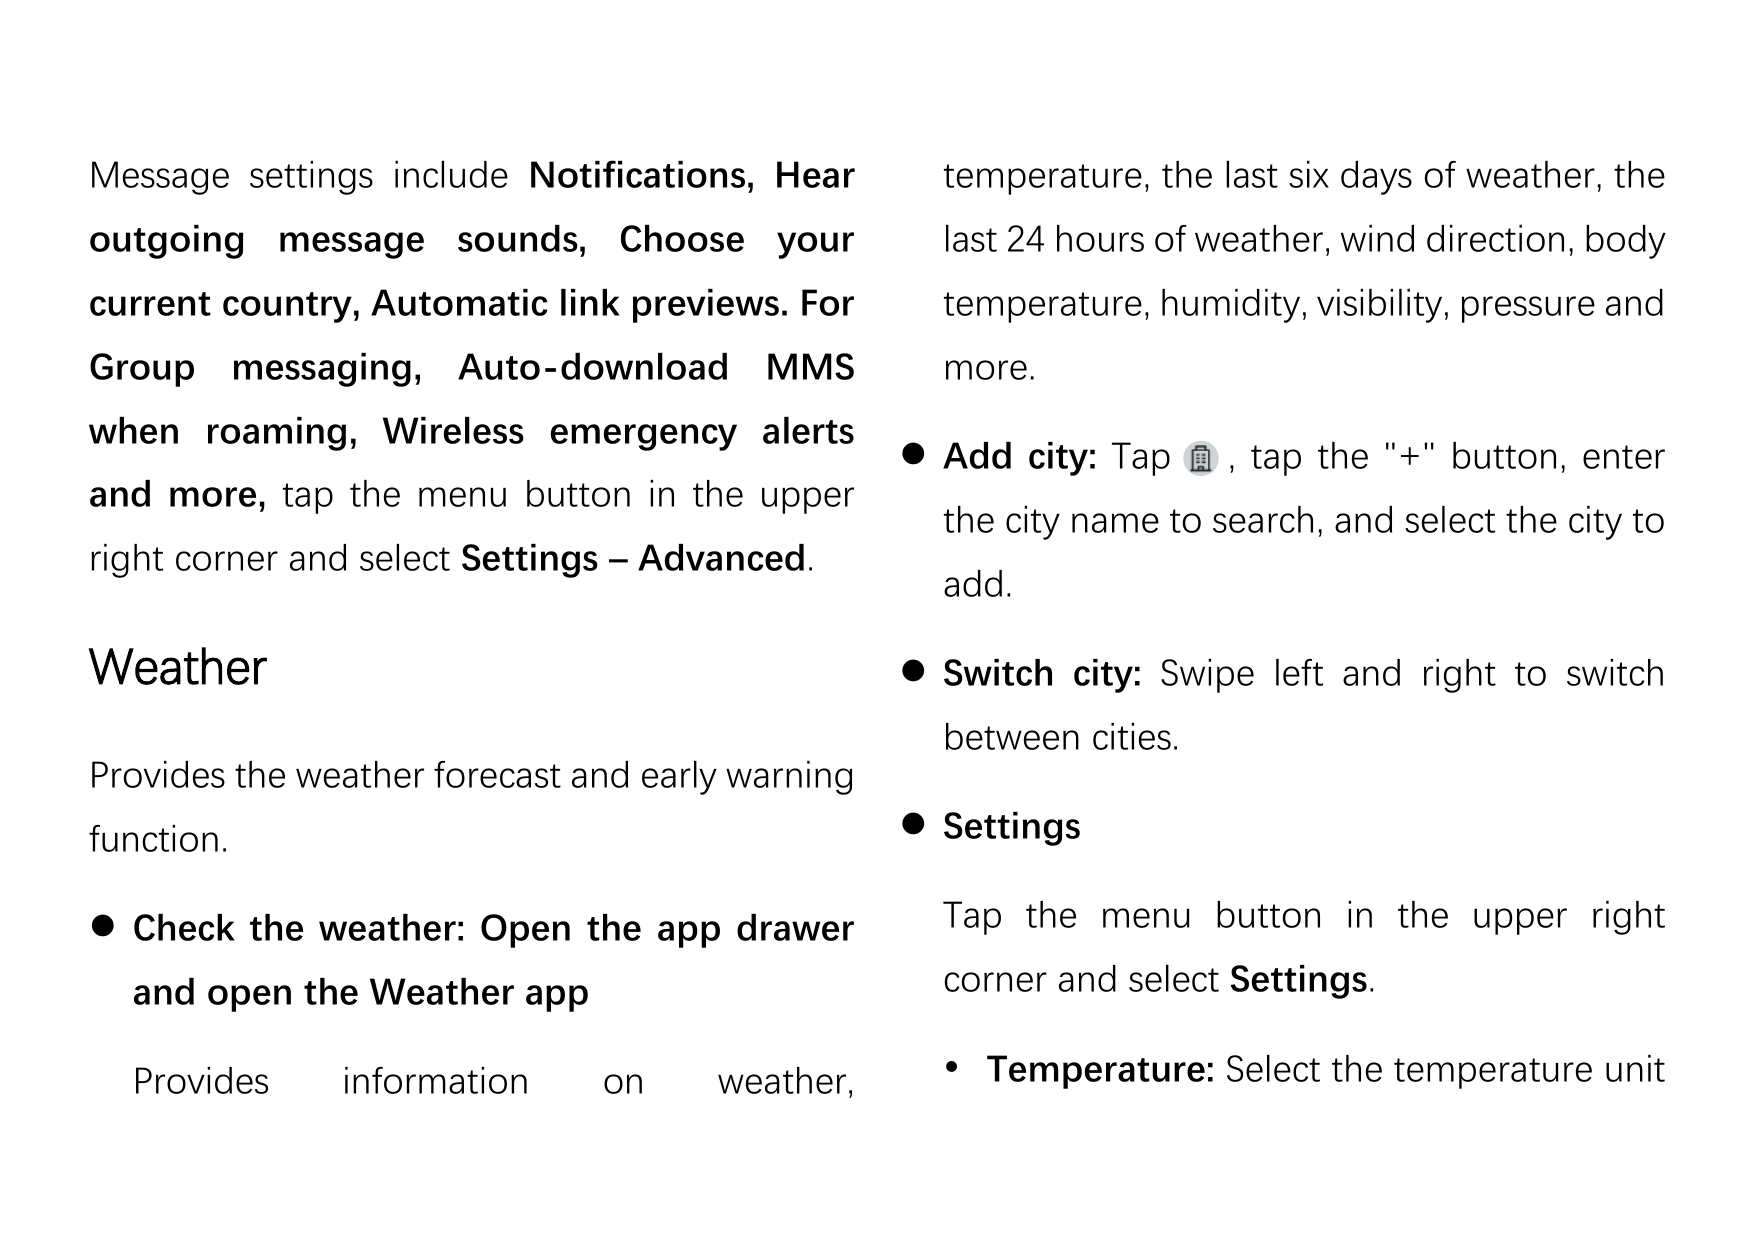 Message settings include Notifications, Heartemperature, the last six days of weather, theoutgoing message sounds, Choose yourla